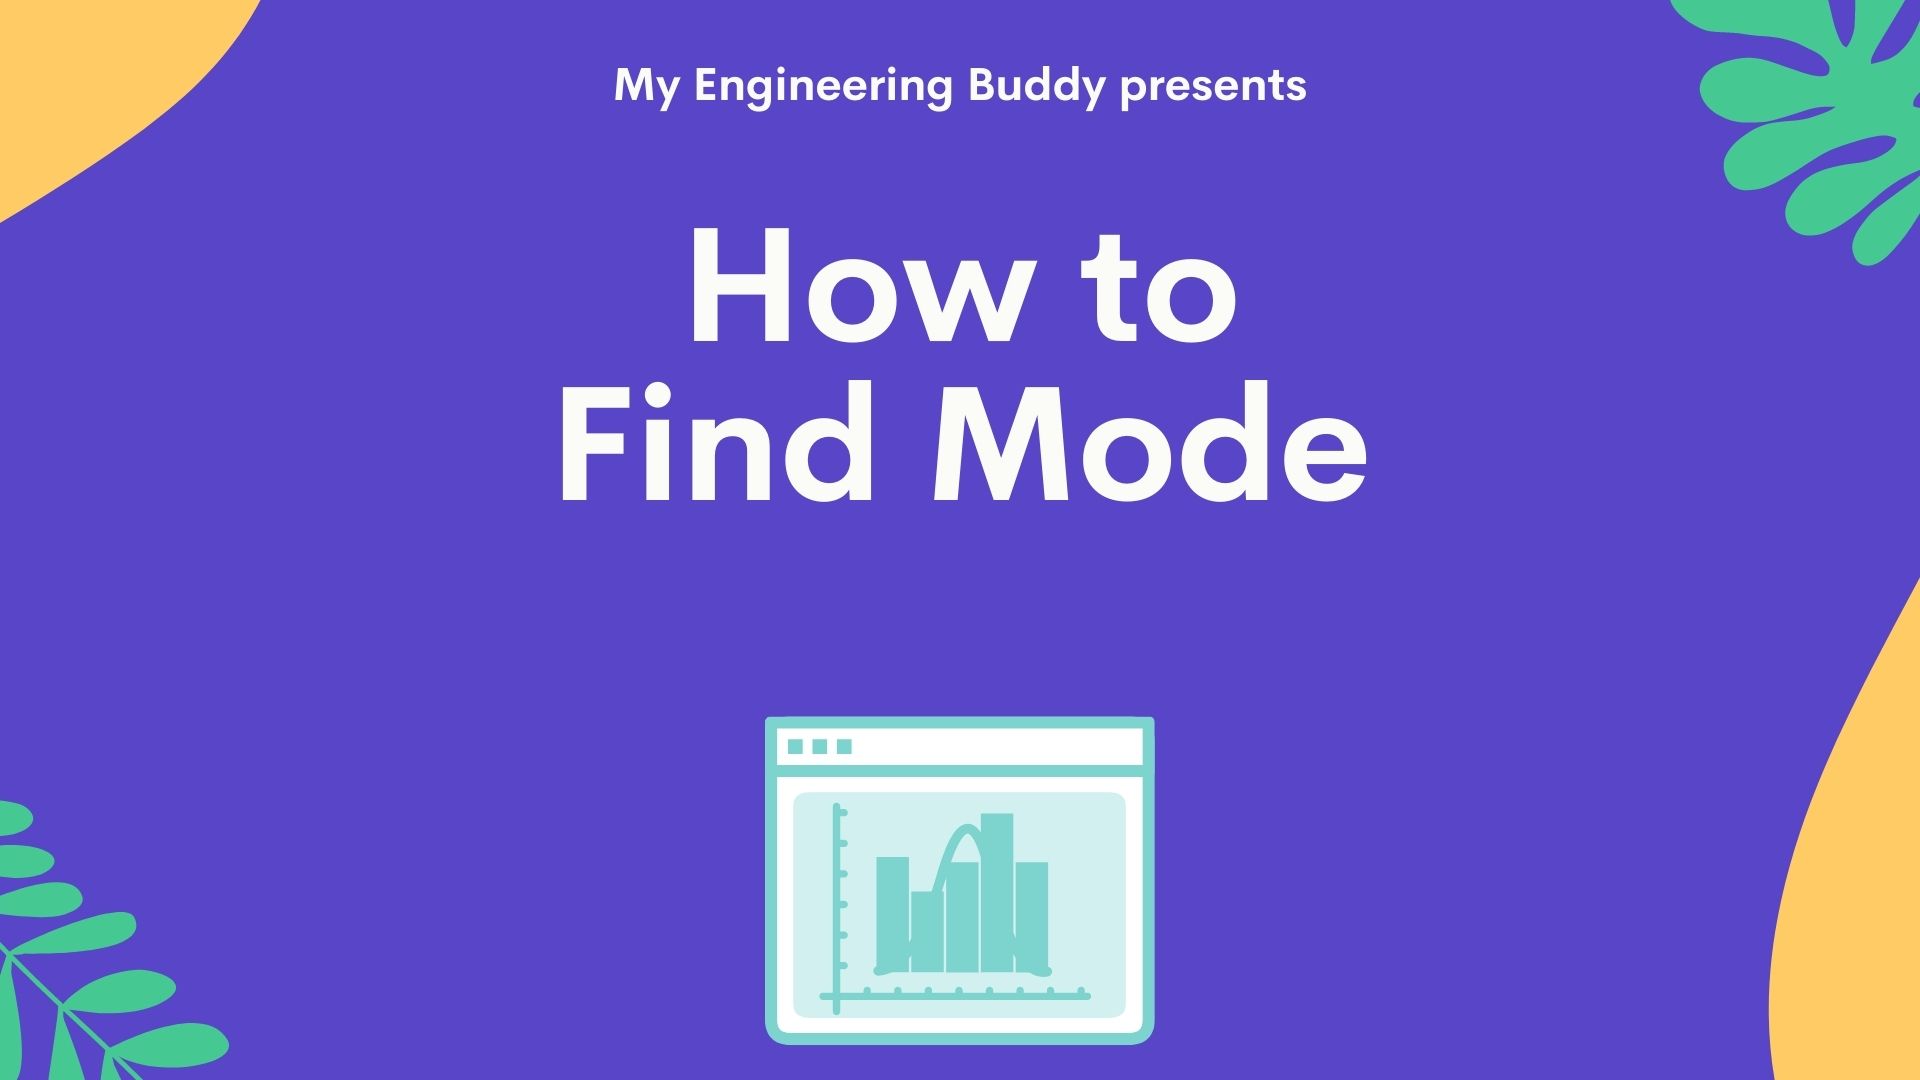 How to Find Mode in Statistics